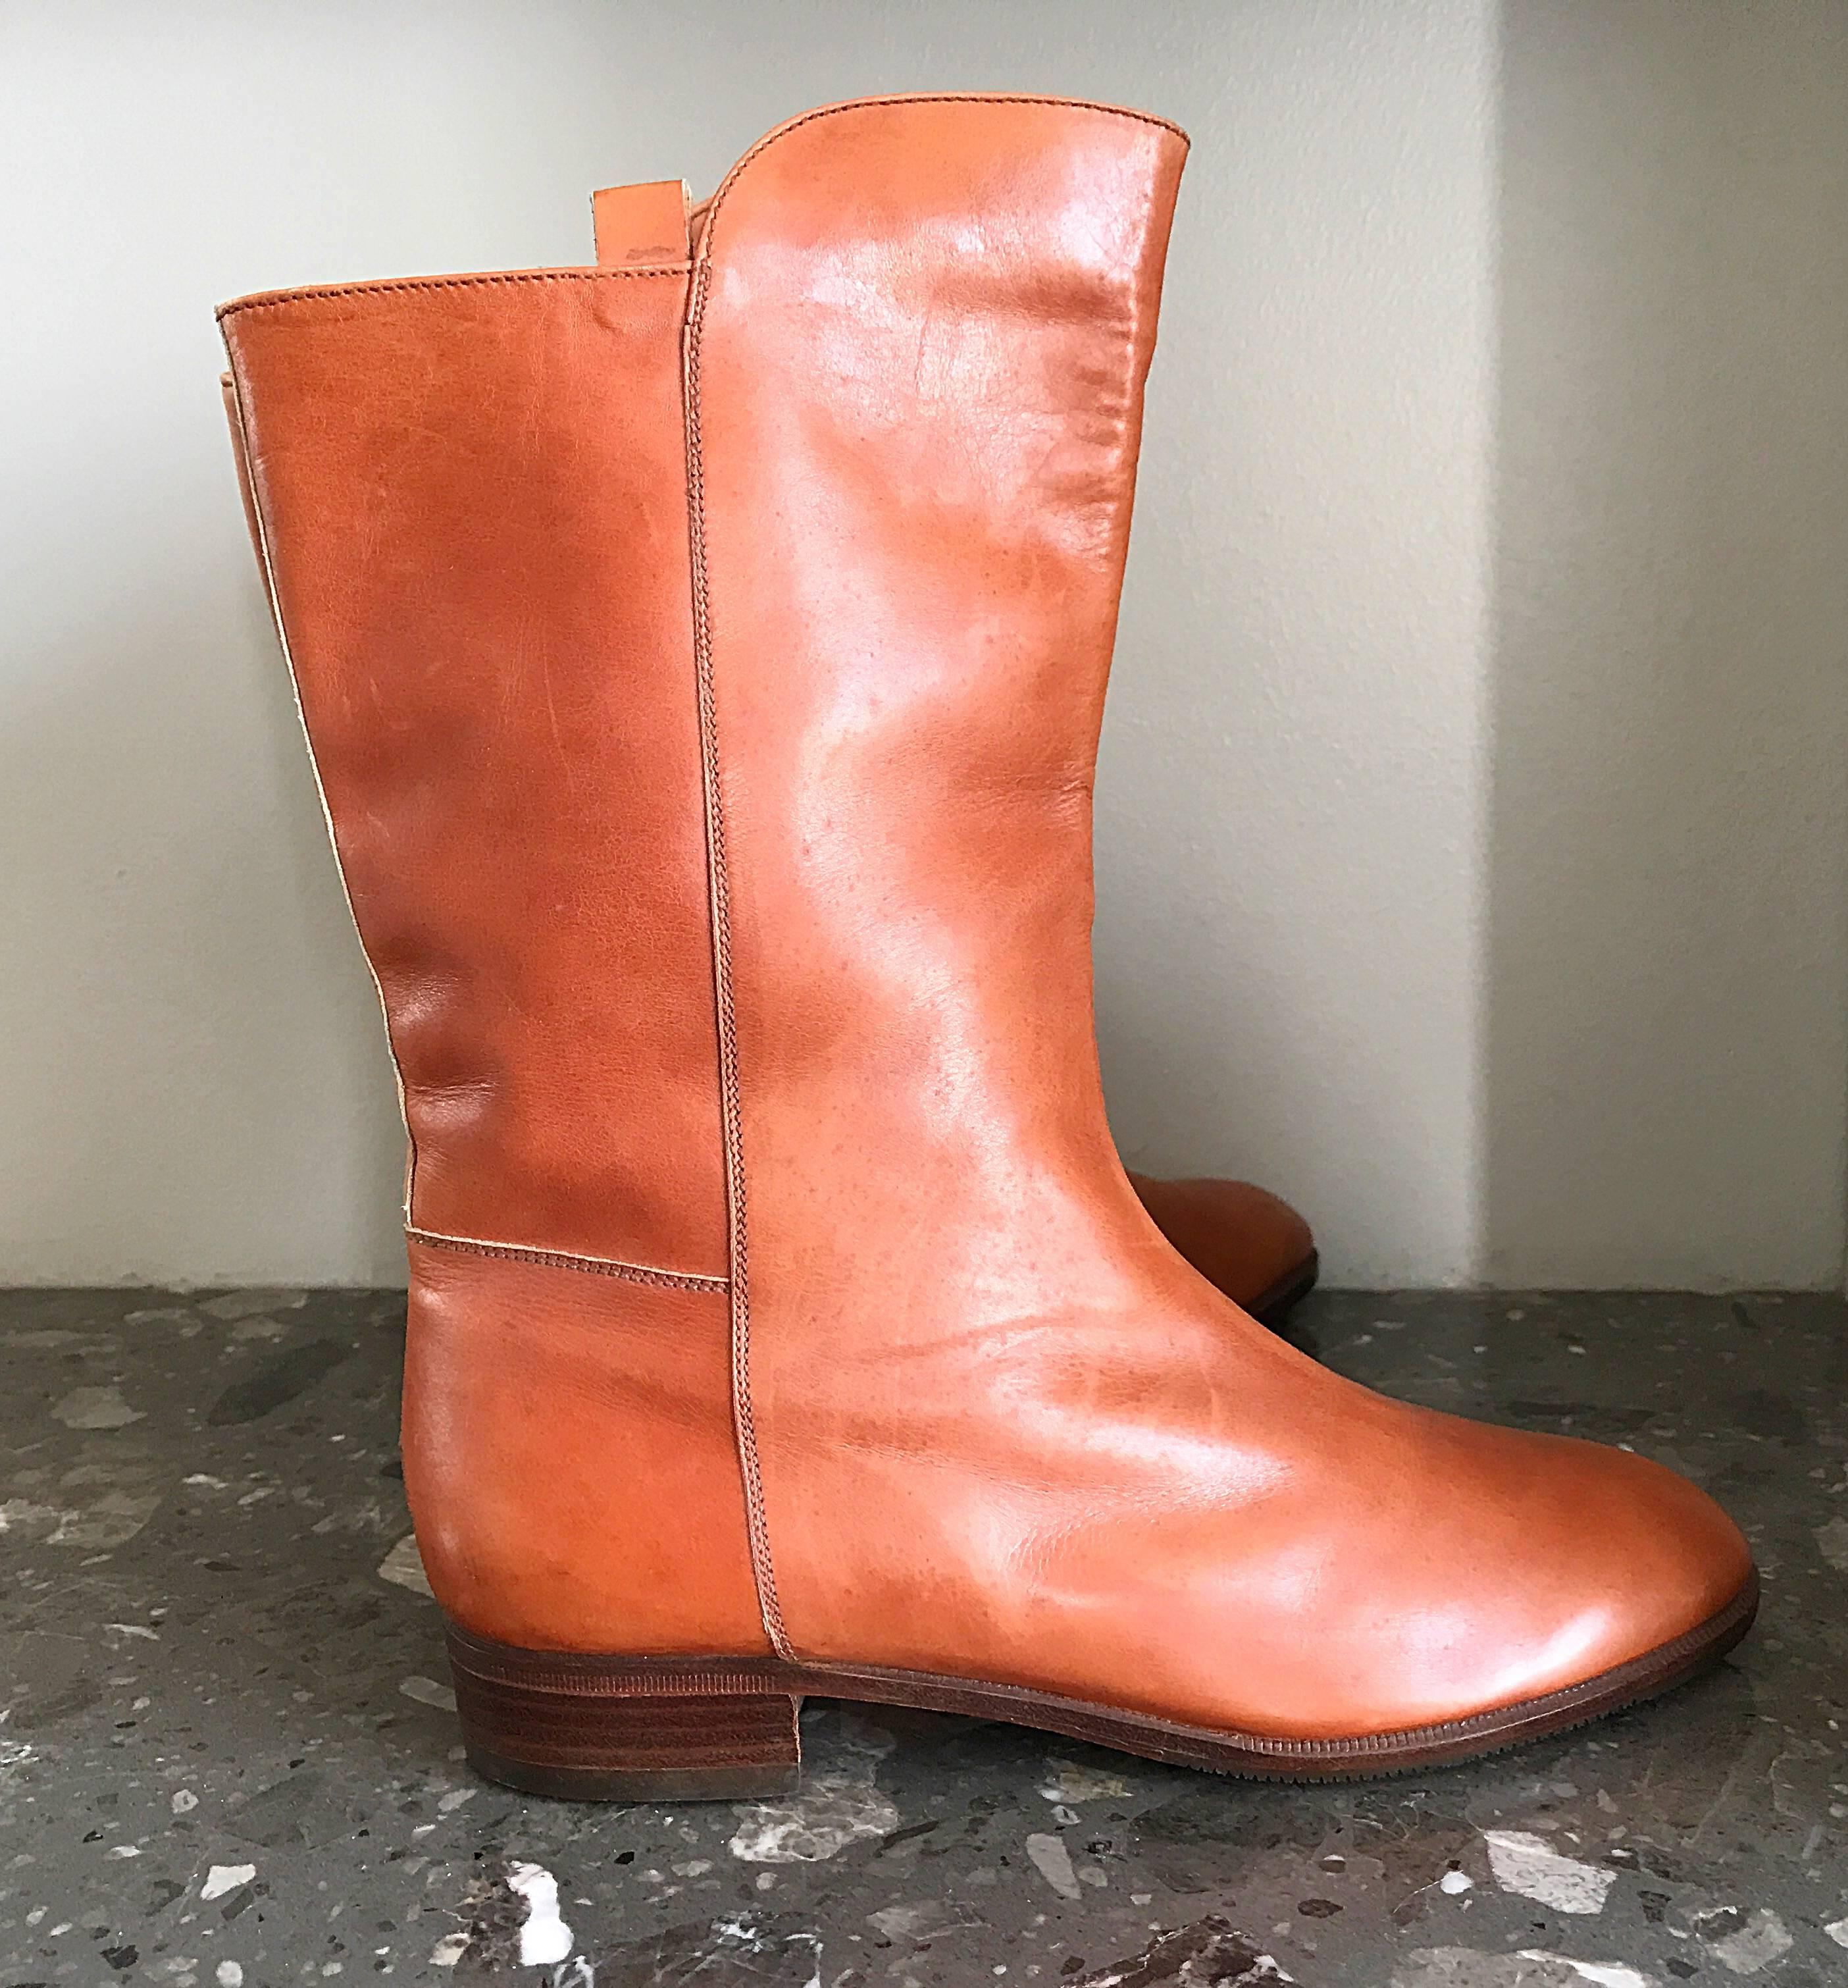 Orange New 1980s Perry Ellis Size 6 Tan Saddle Leather Deadstock Calf Booties Boots For Sale